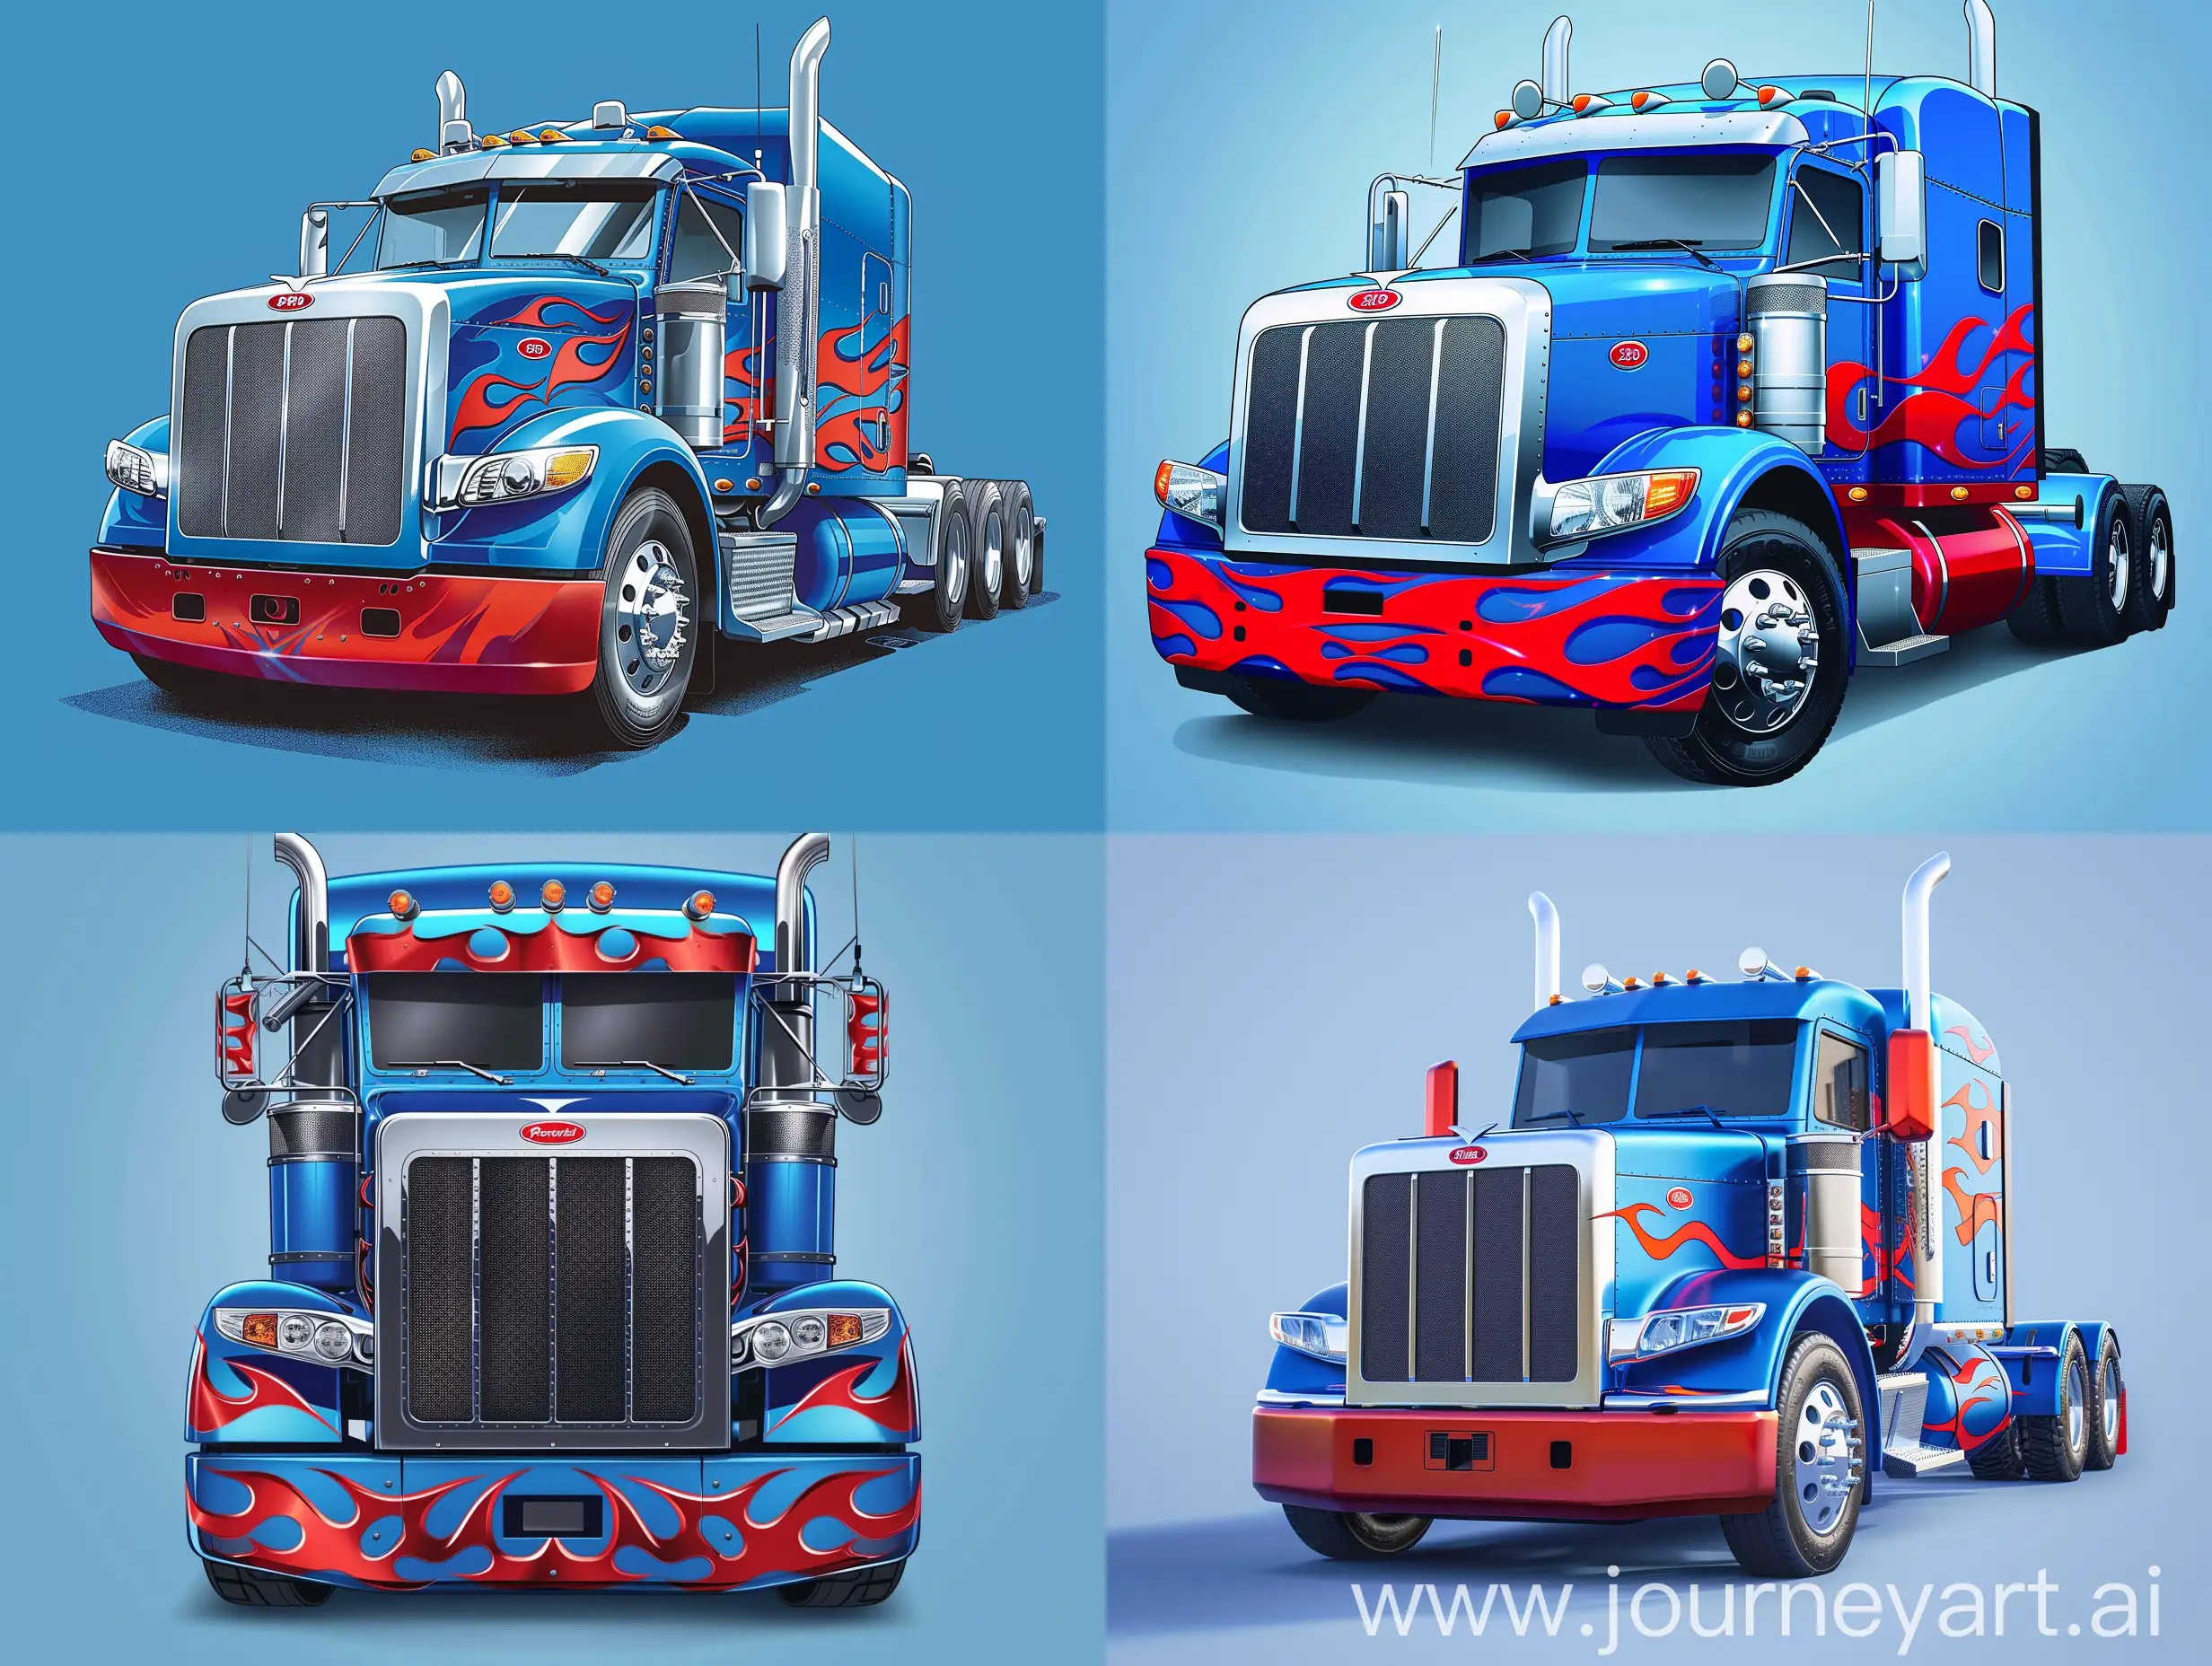 Peterbilt 359 blue color truck, red flame patterns on the front, red blue truck illustration, blue background